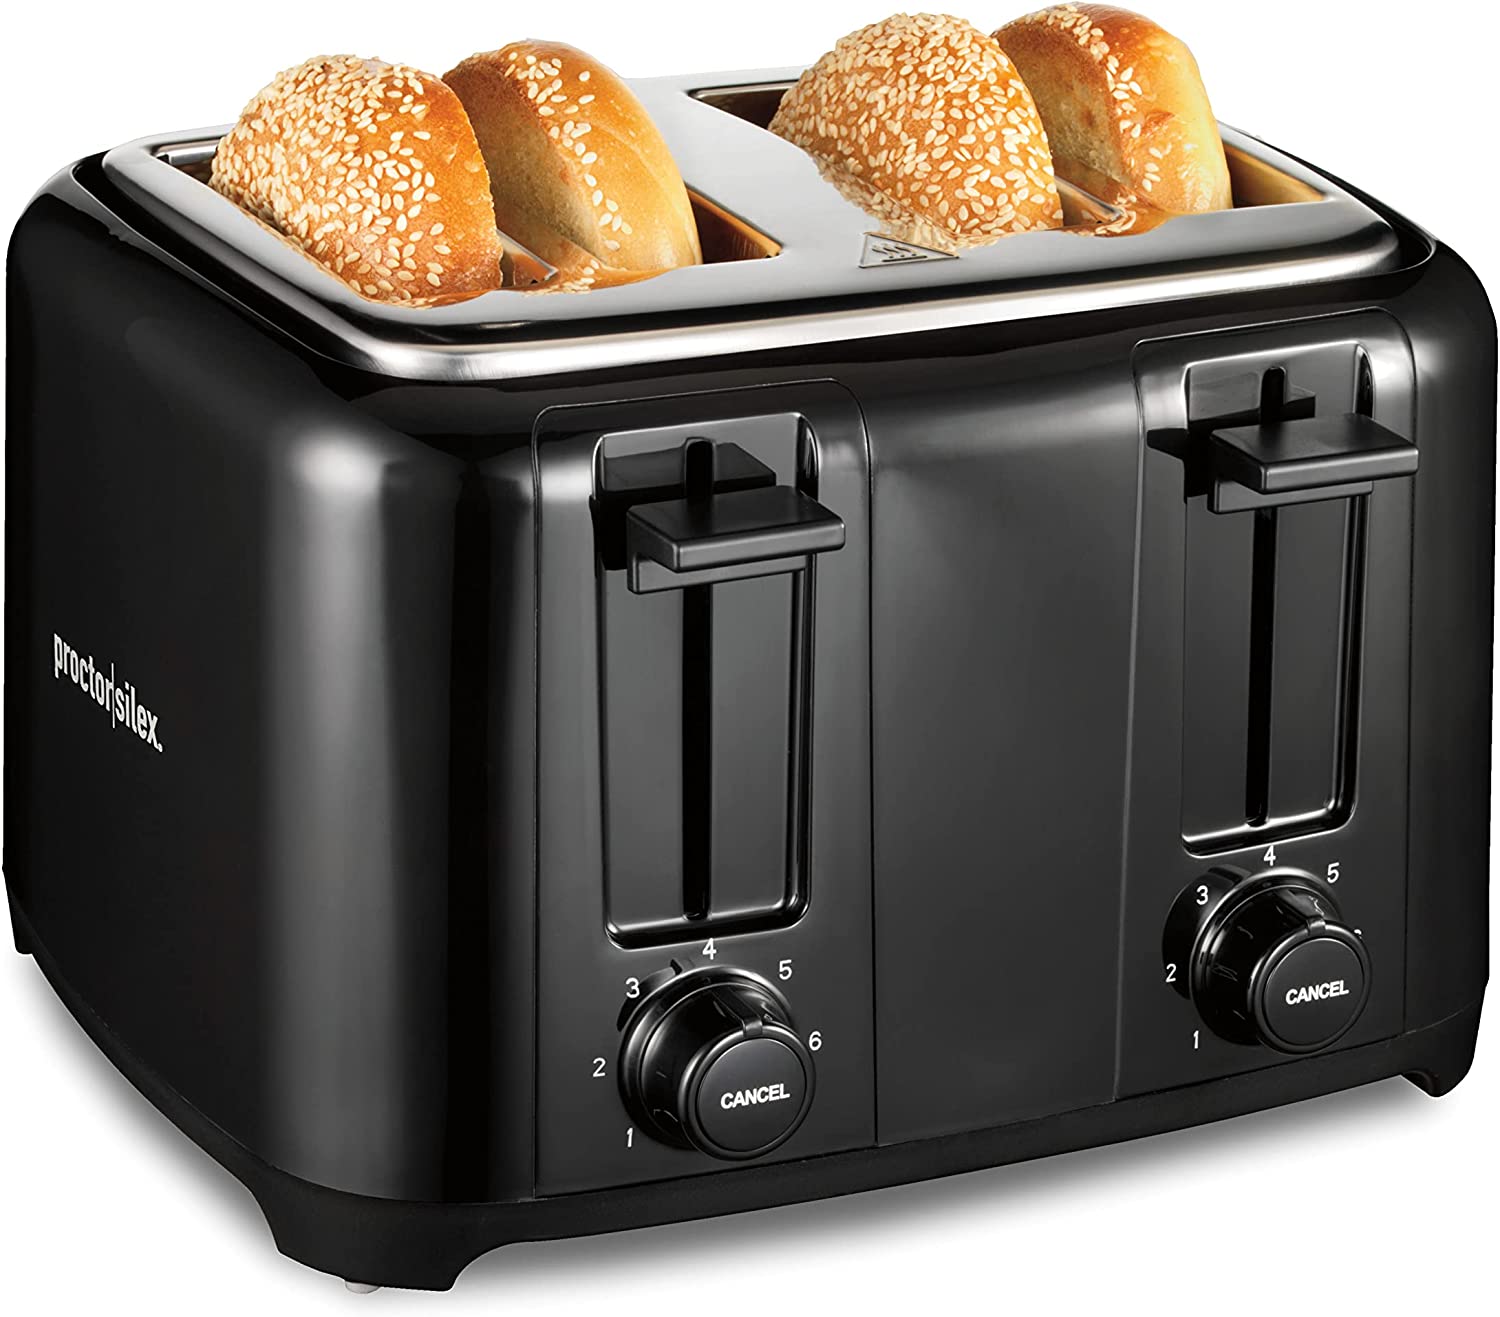 https://bigbigmart.com/wp-content/uploads/2023/05/Proctor-Silex-4-Slice-Toaster-with-Extra-Wide-Slots-for-Bagels-Cool-Touch-Walls-Shade-Selector-Toast-Boost-Auto-Shut-off-and-Cancel-Button-Black-24215PS.jpg